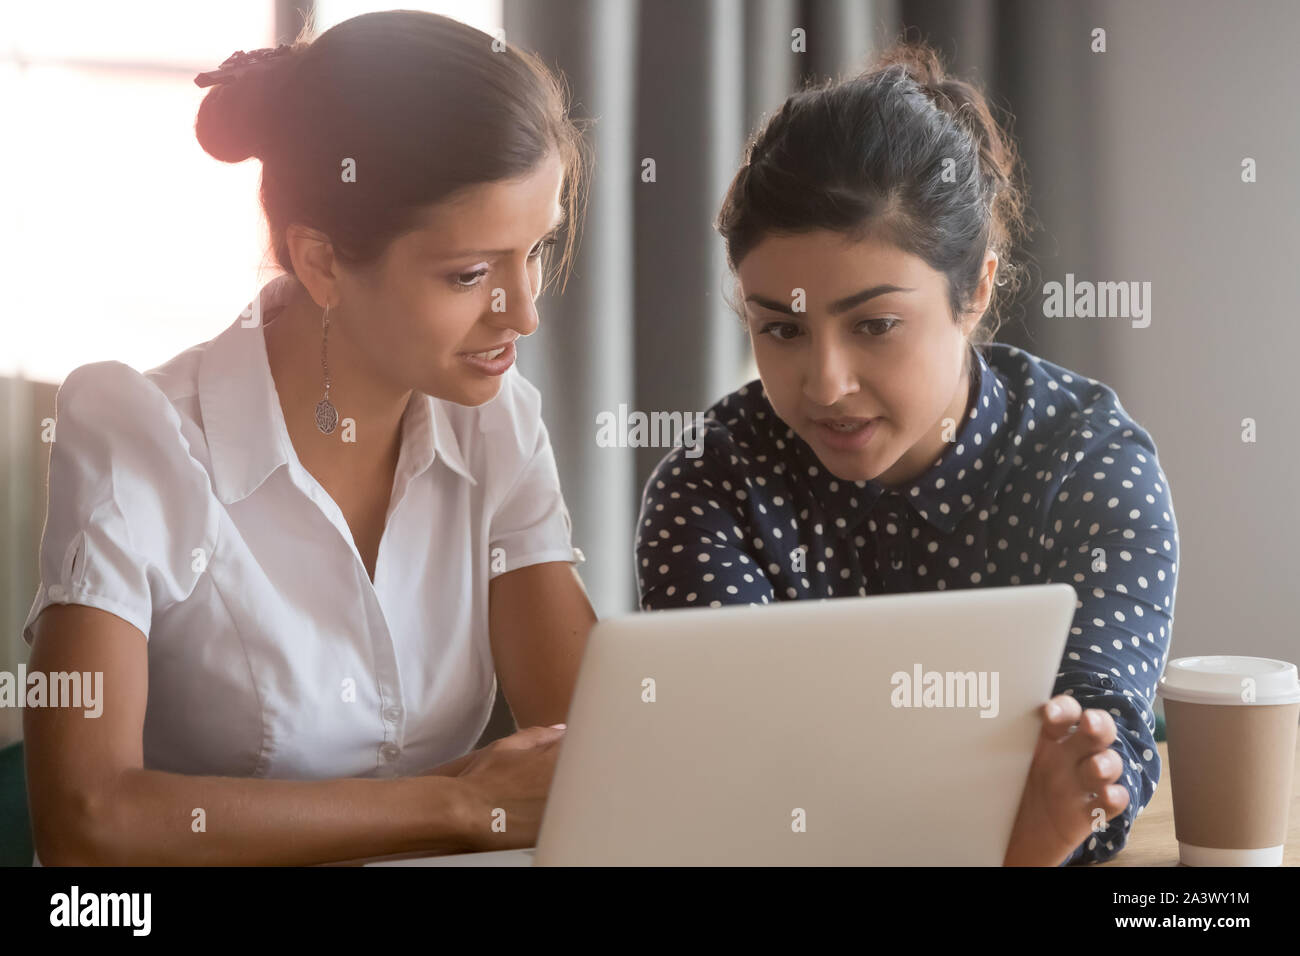 Focused diverse ethnicity female coworkers team brainstorming pointing on laptop Stock Photo